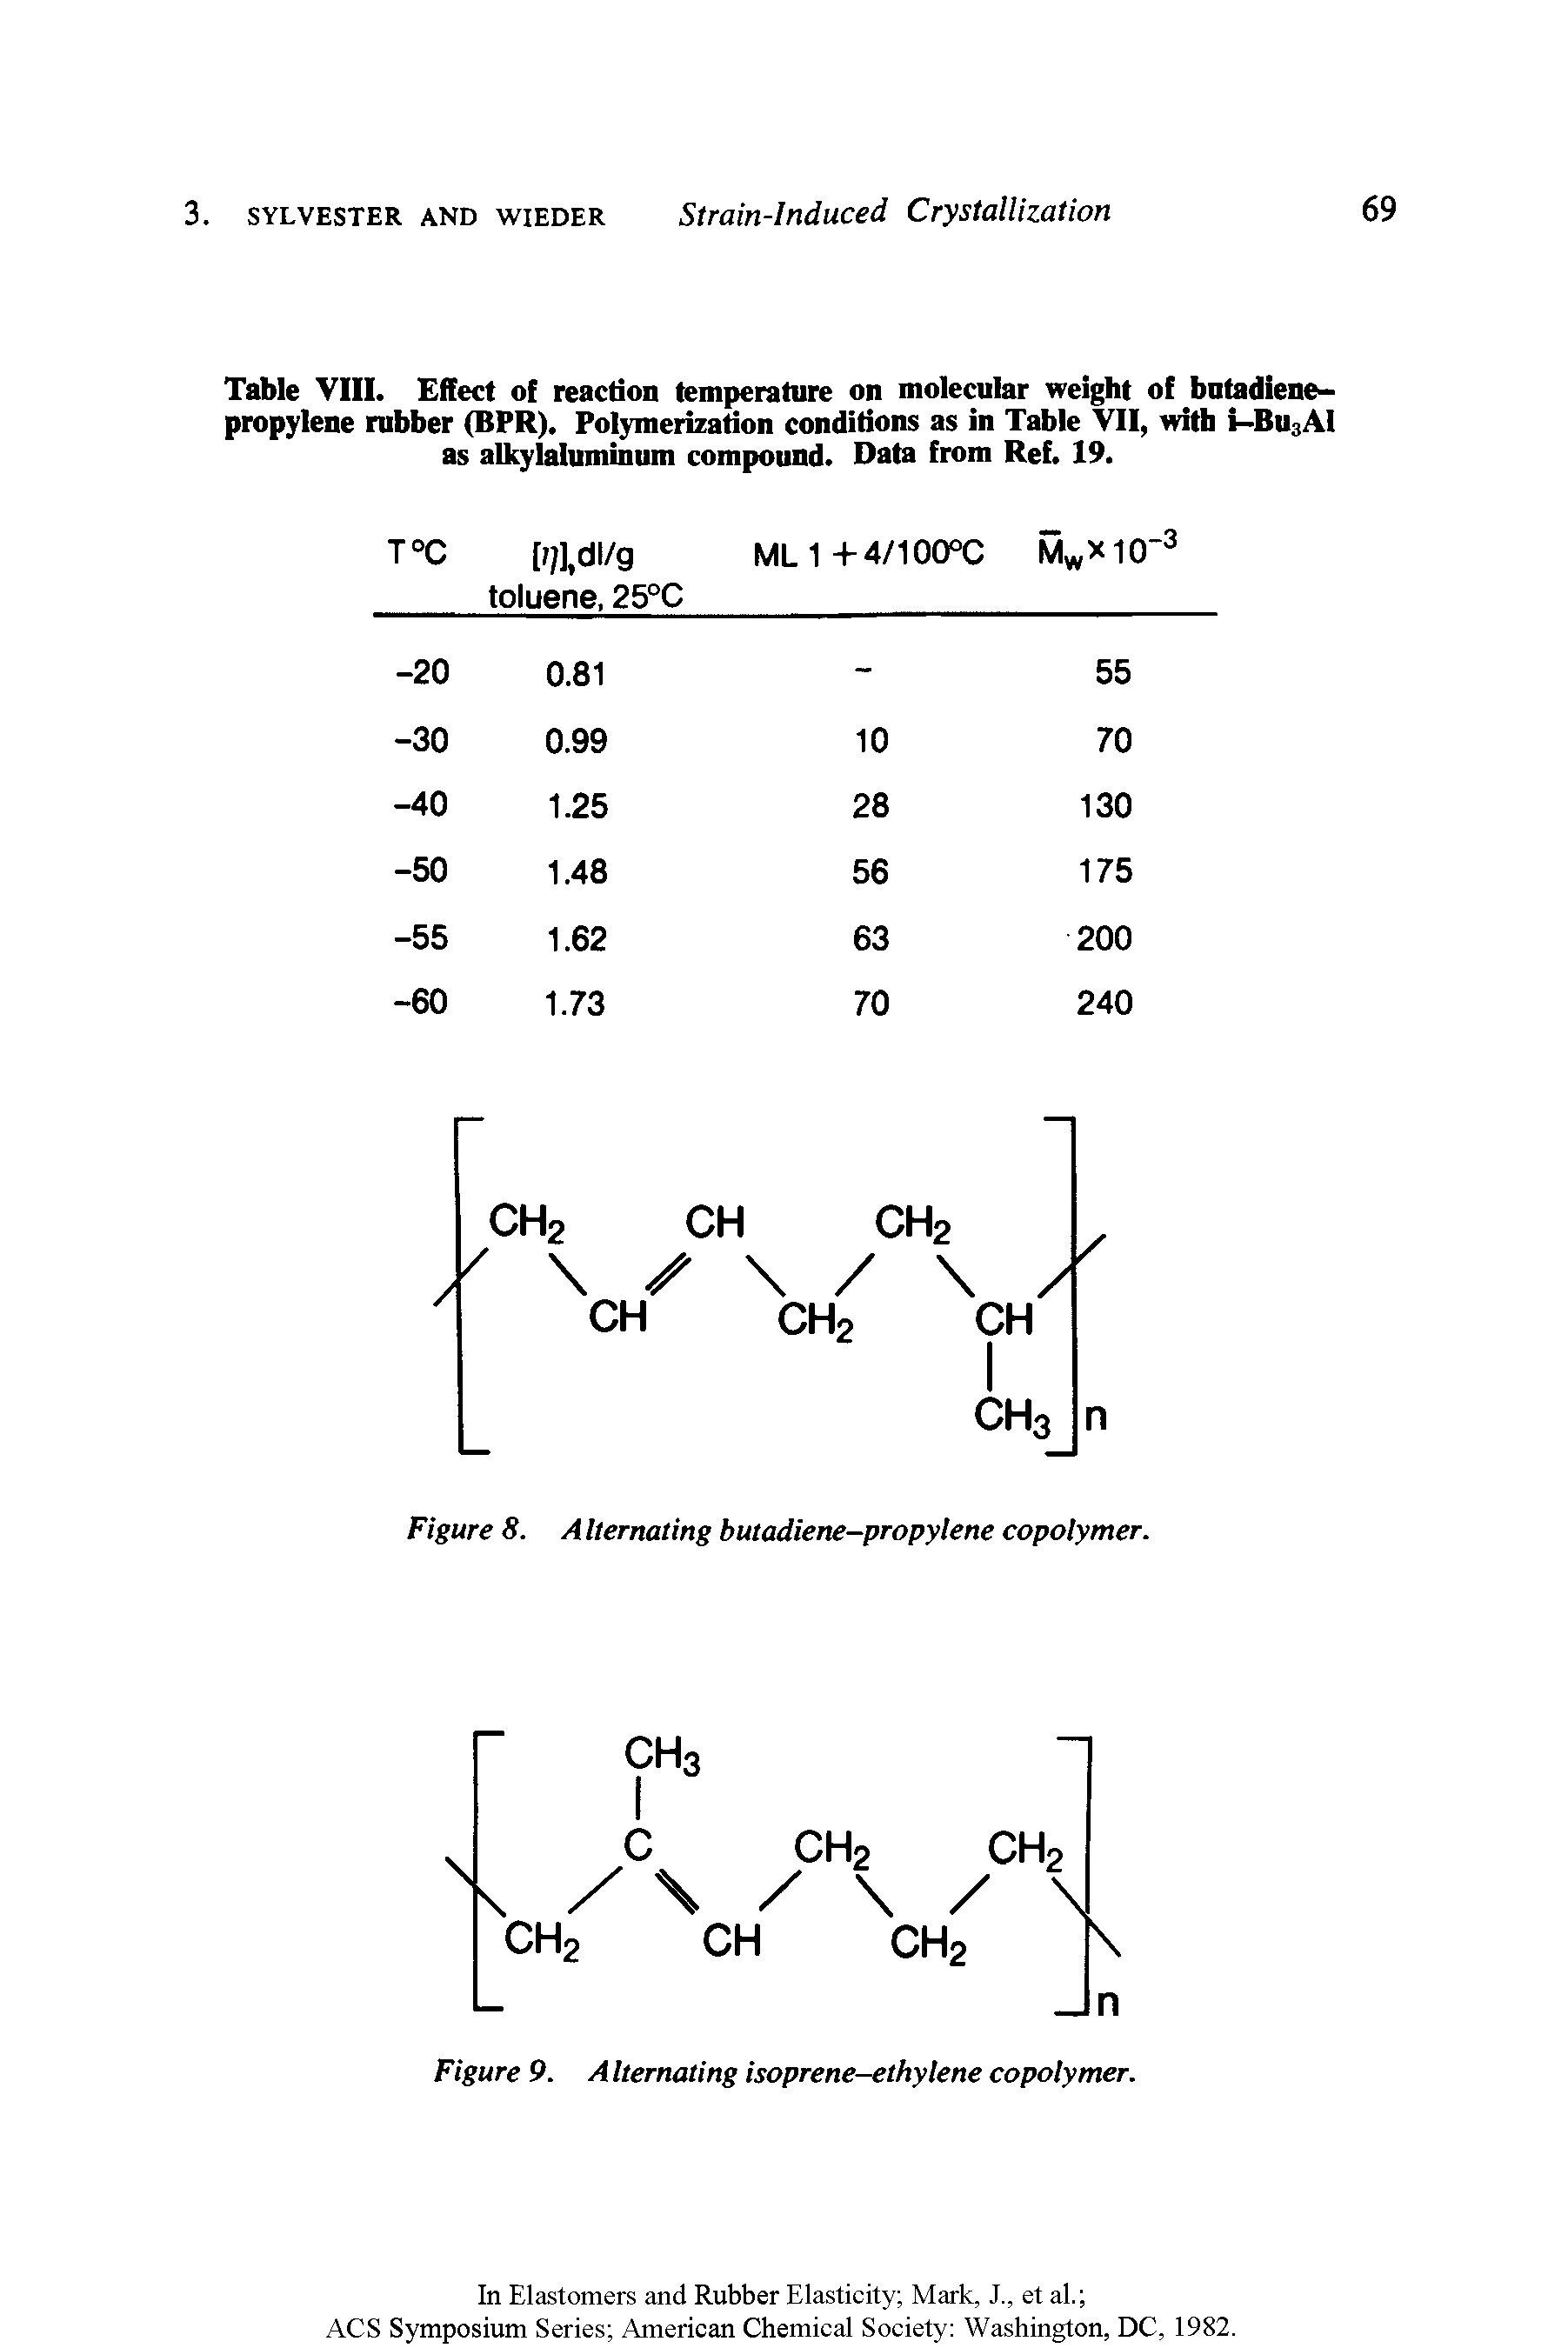 Table VIII. Effect of reaction temperature on molecular weight of butadiene-propylene rubber (BPR). Polymerization conditions as in Table VII, with i-Bu3Al as alkylaluminum compound. Data from Ref. 19.